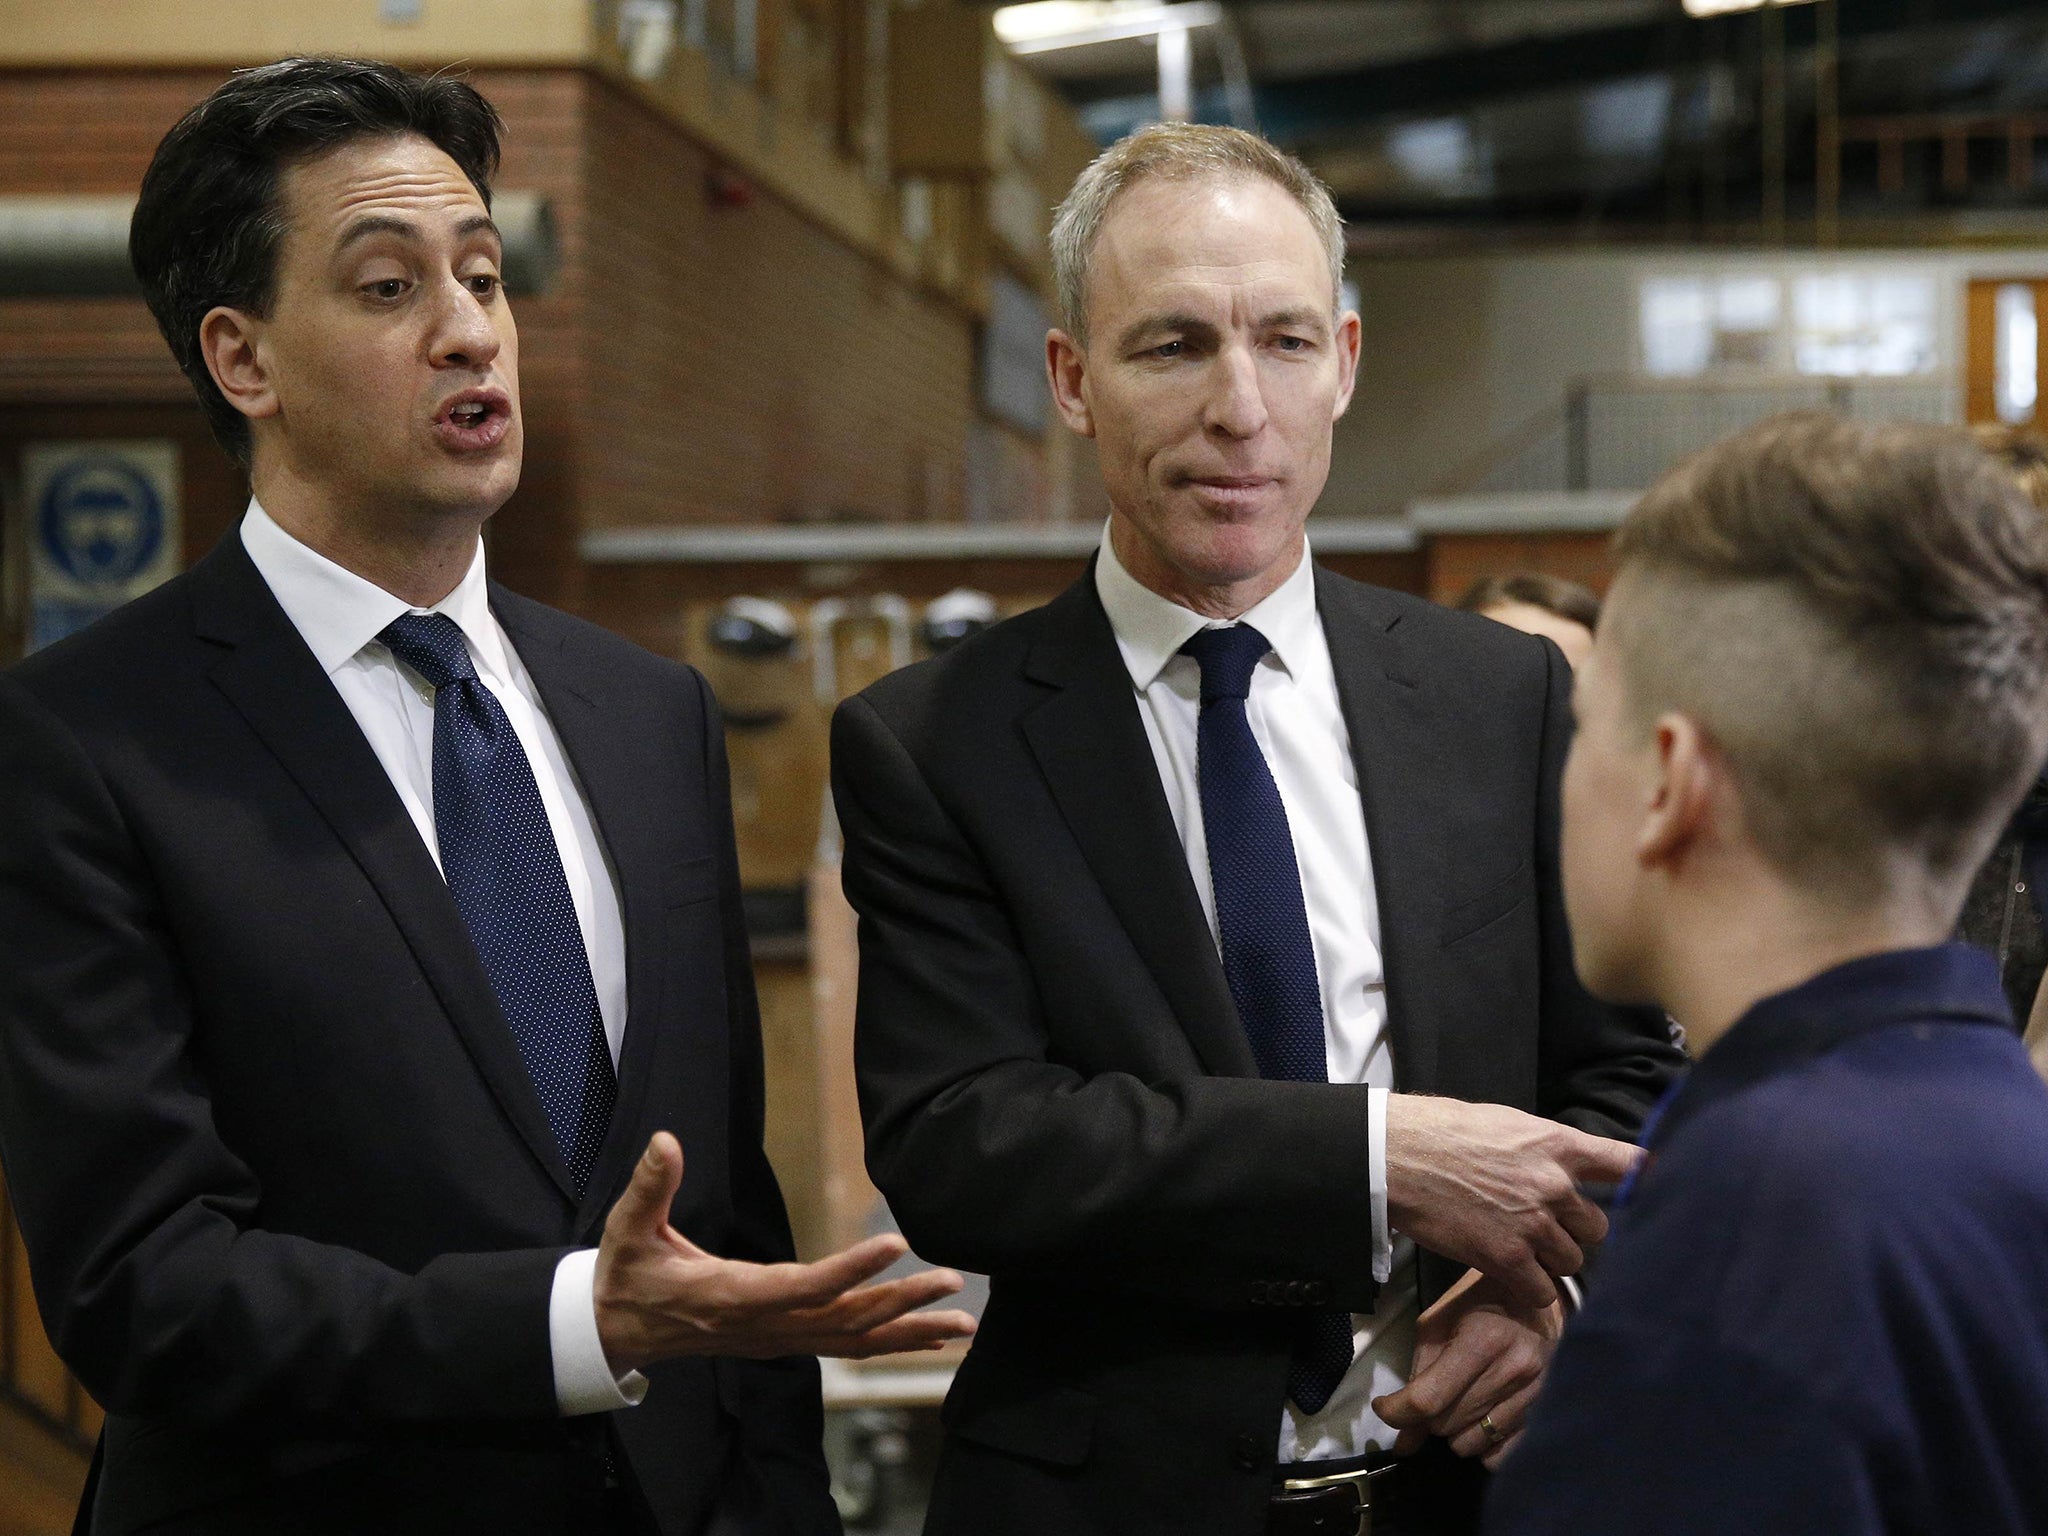 Ed Miliband and Jim Murphy, the Scottish Labour leader, visit Queenslie Training
Centre in Glasgow last month